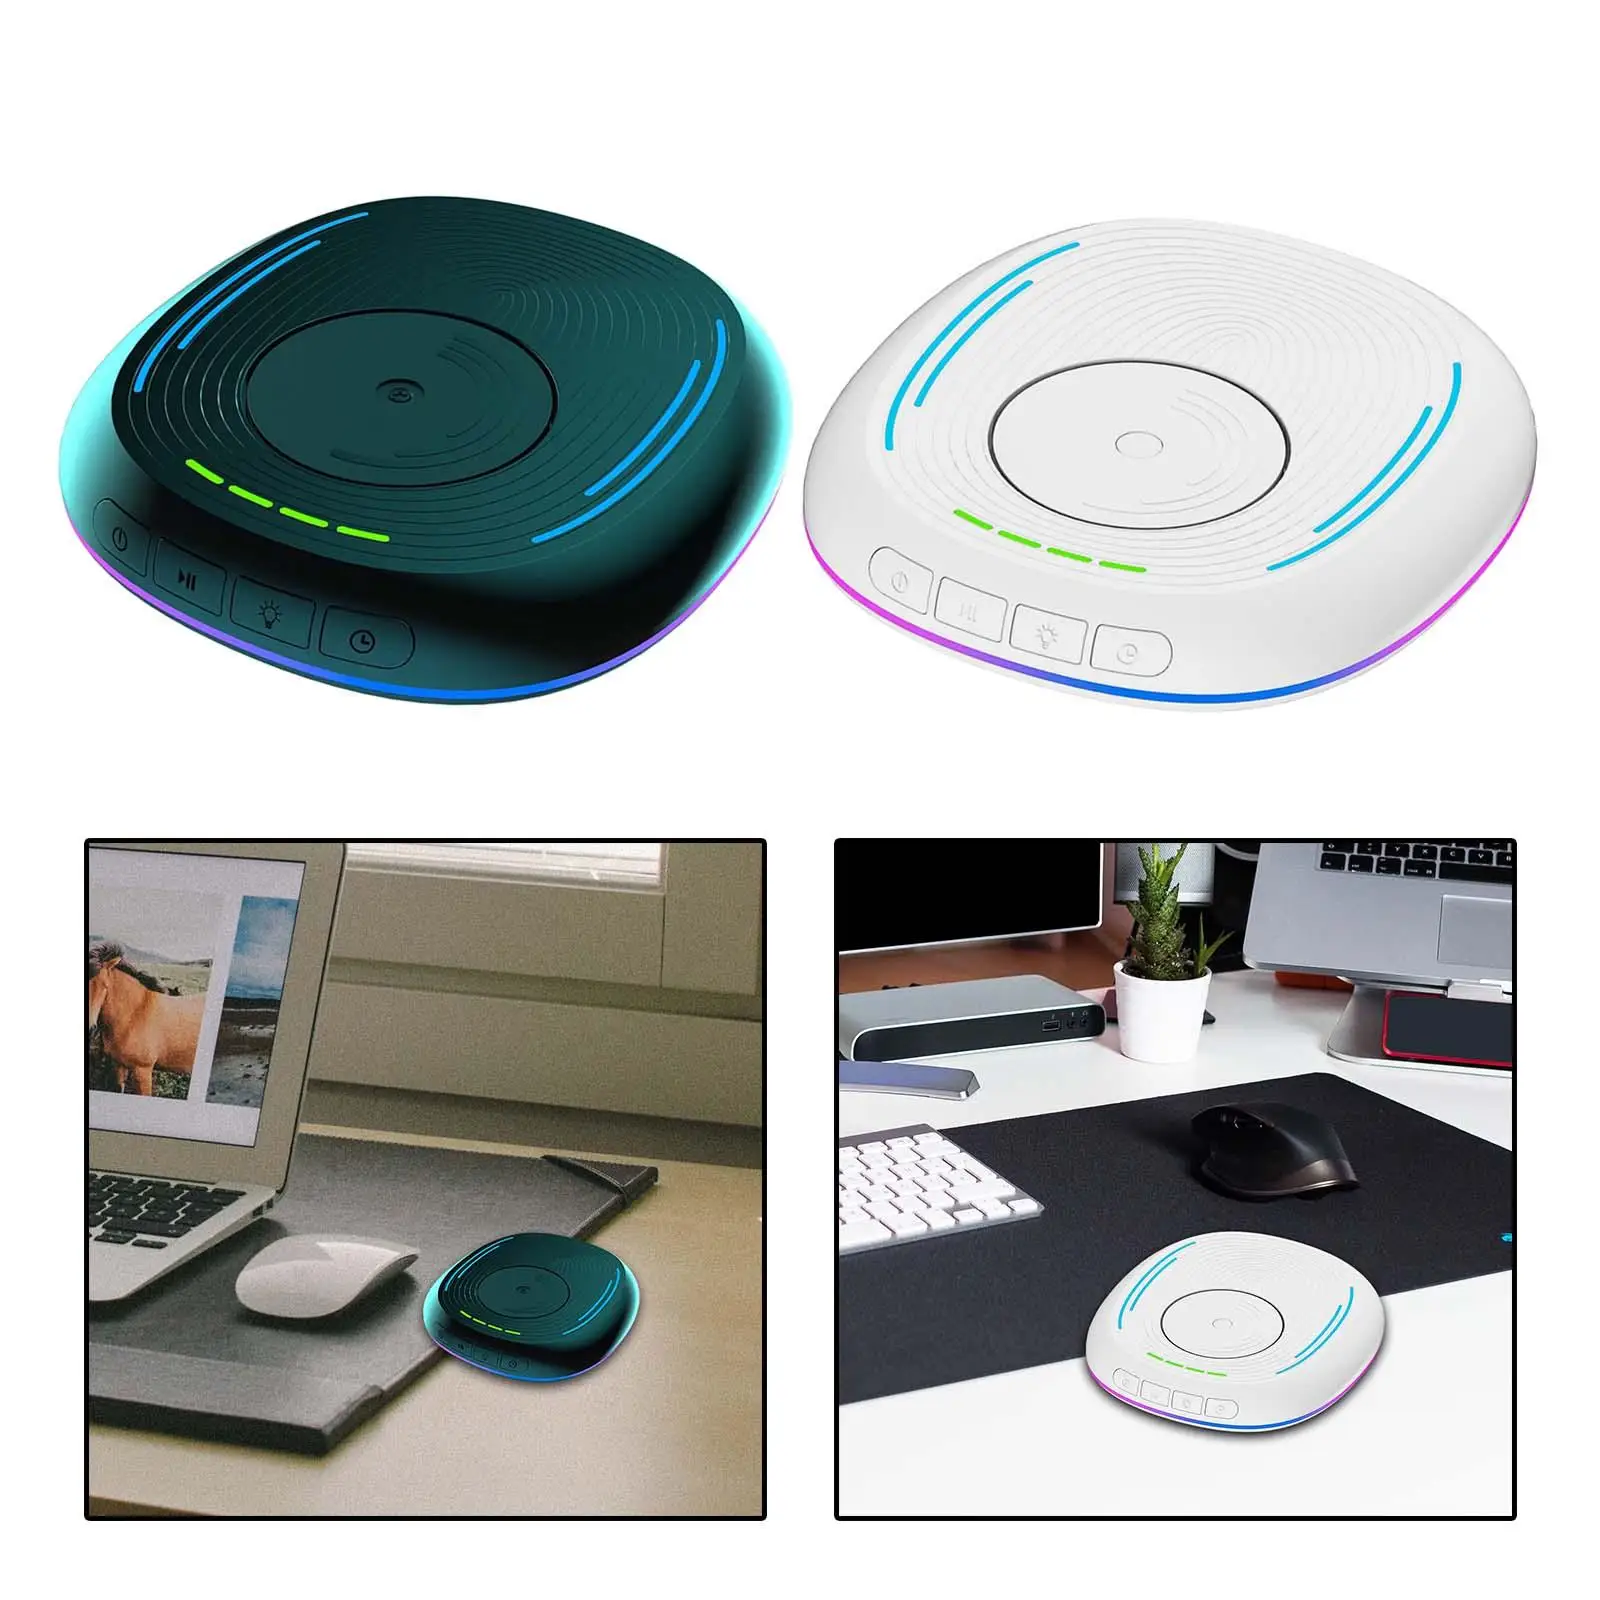 Portable LED Mouse Mover Easy to Carry Simulate Mouse Movement for Laptop